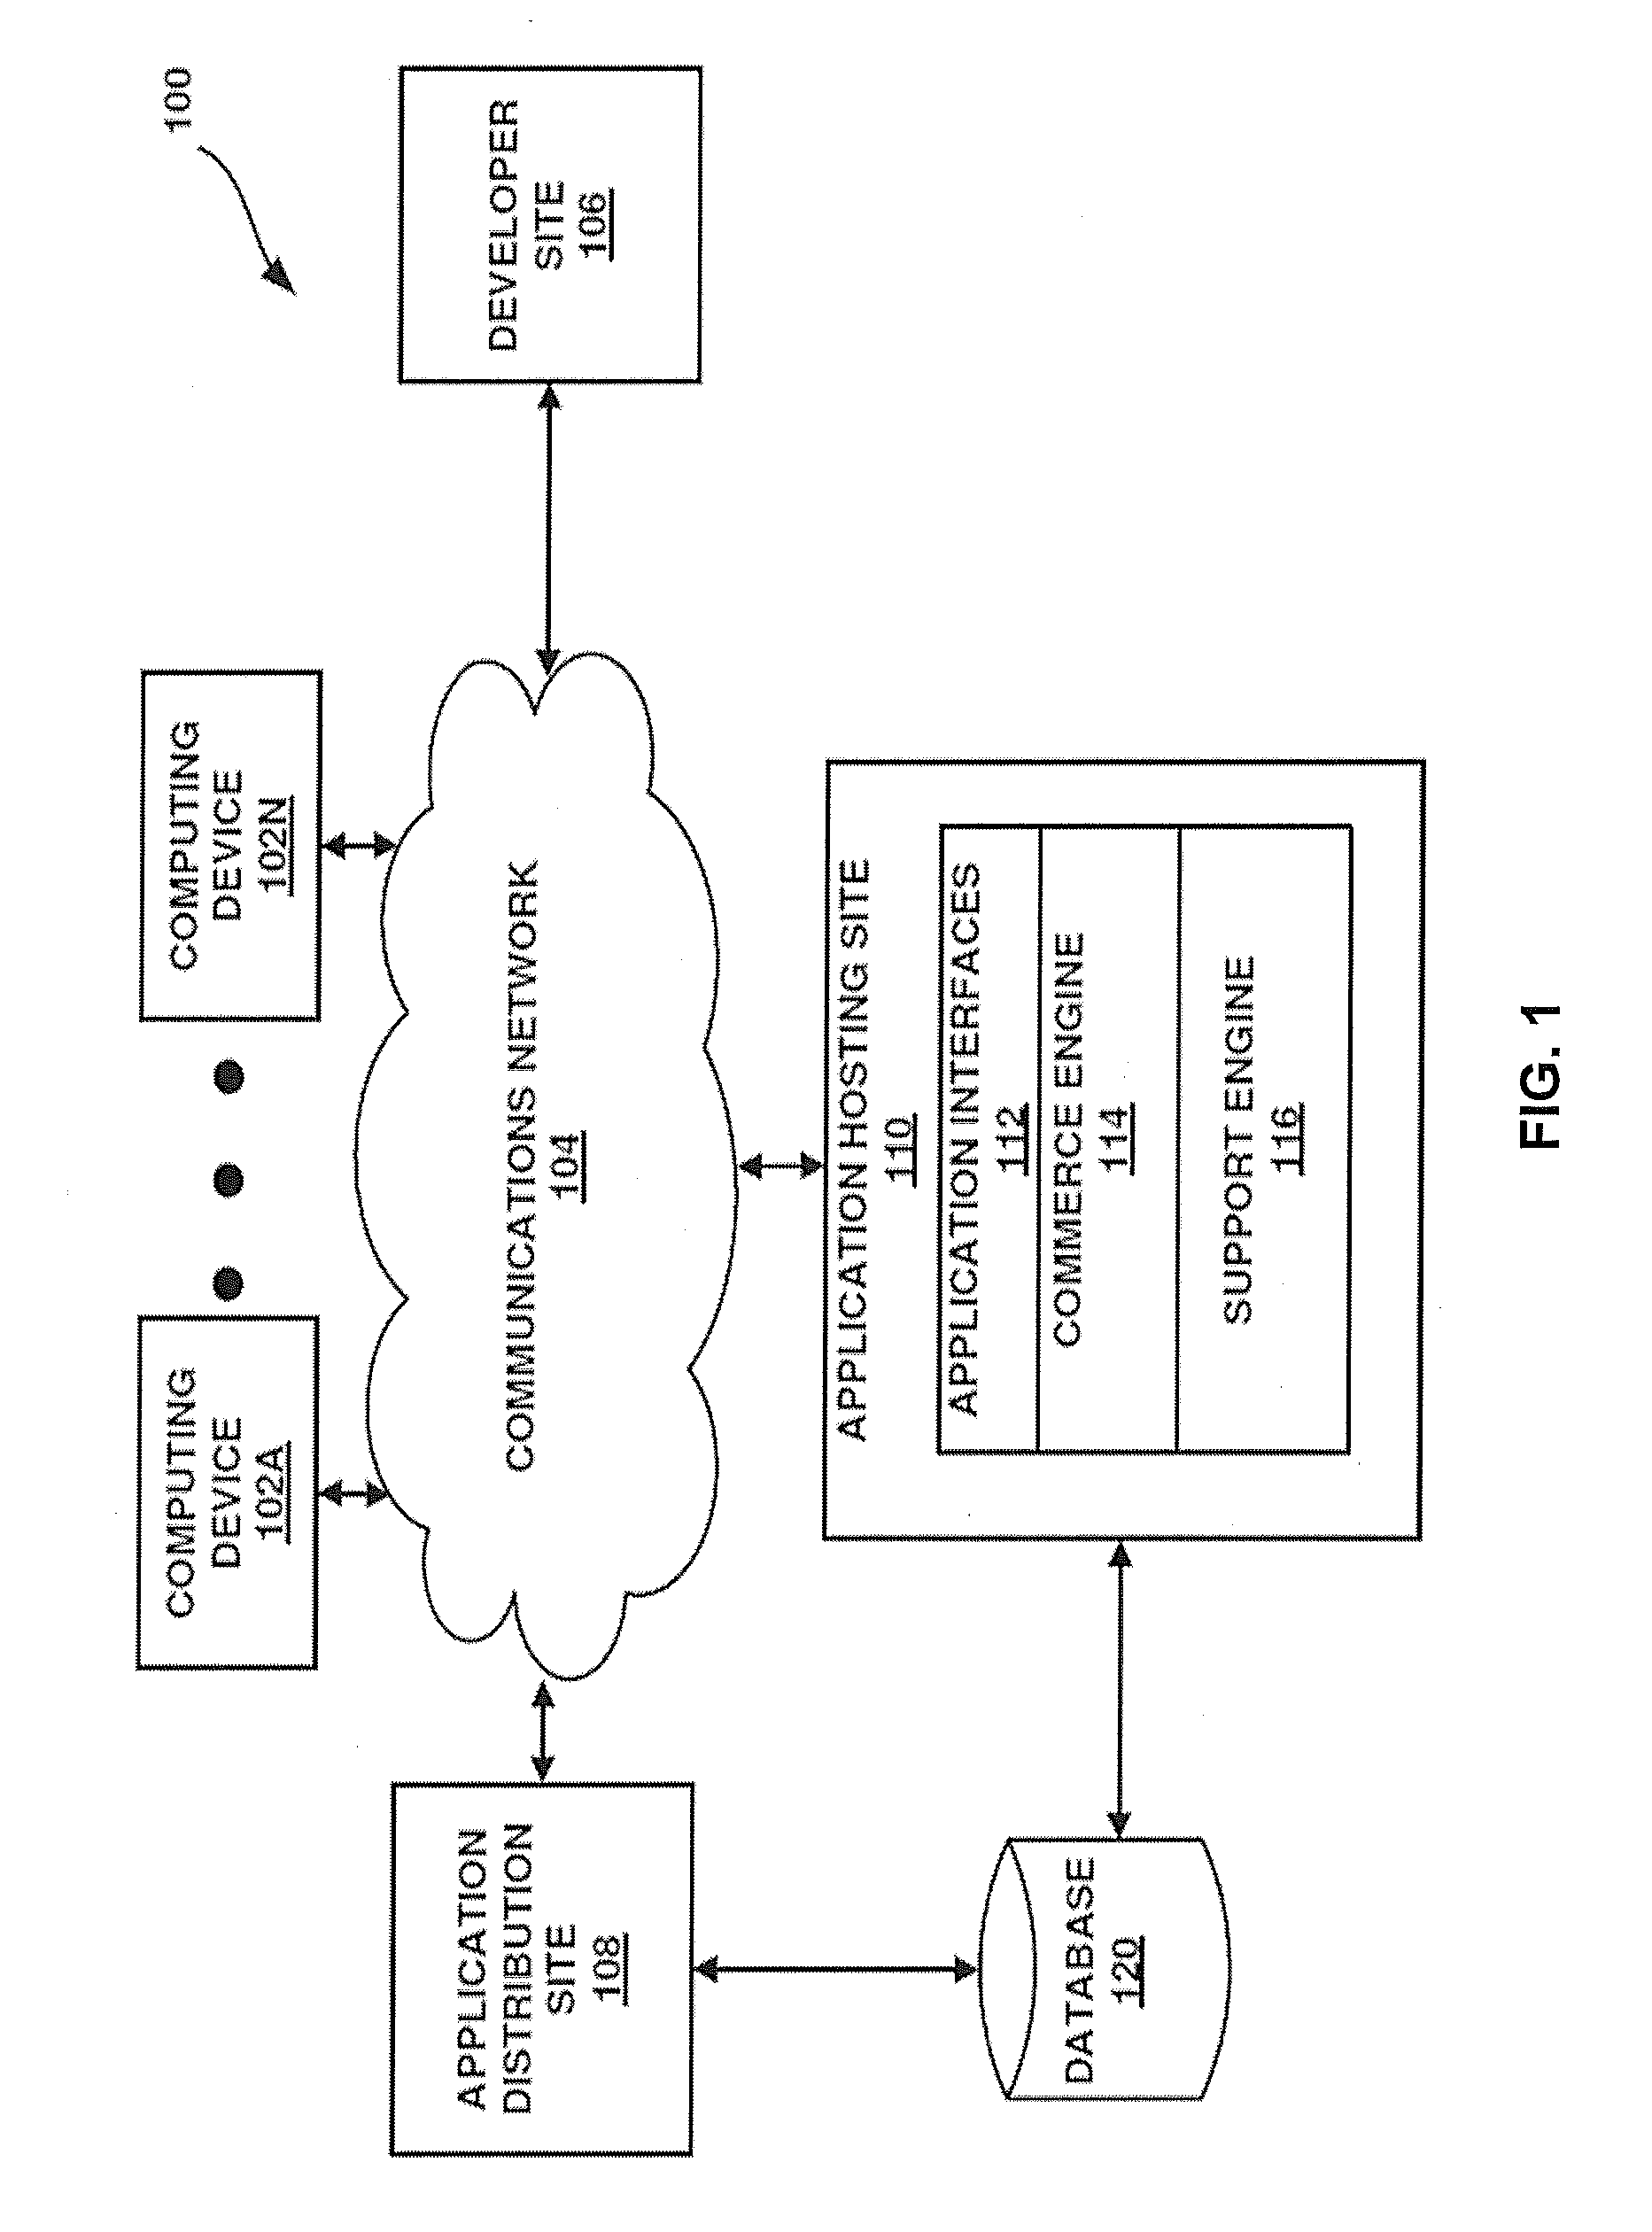 System and methods for trajectory pattern recognition